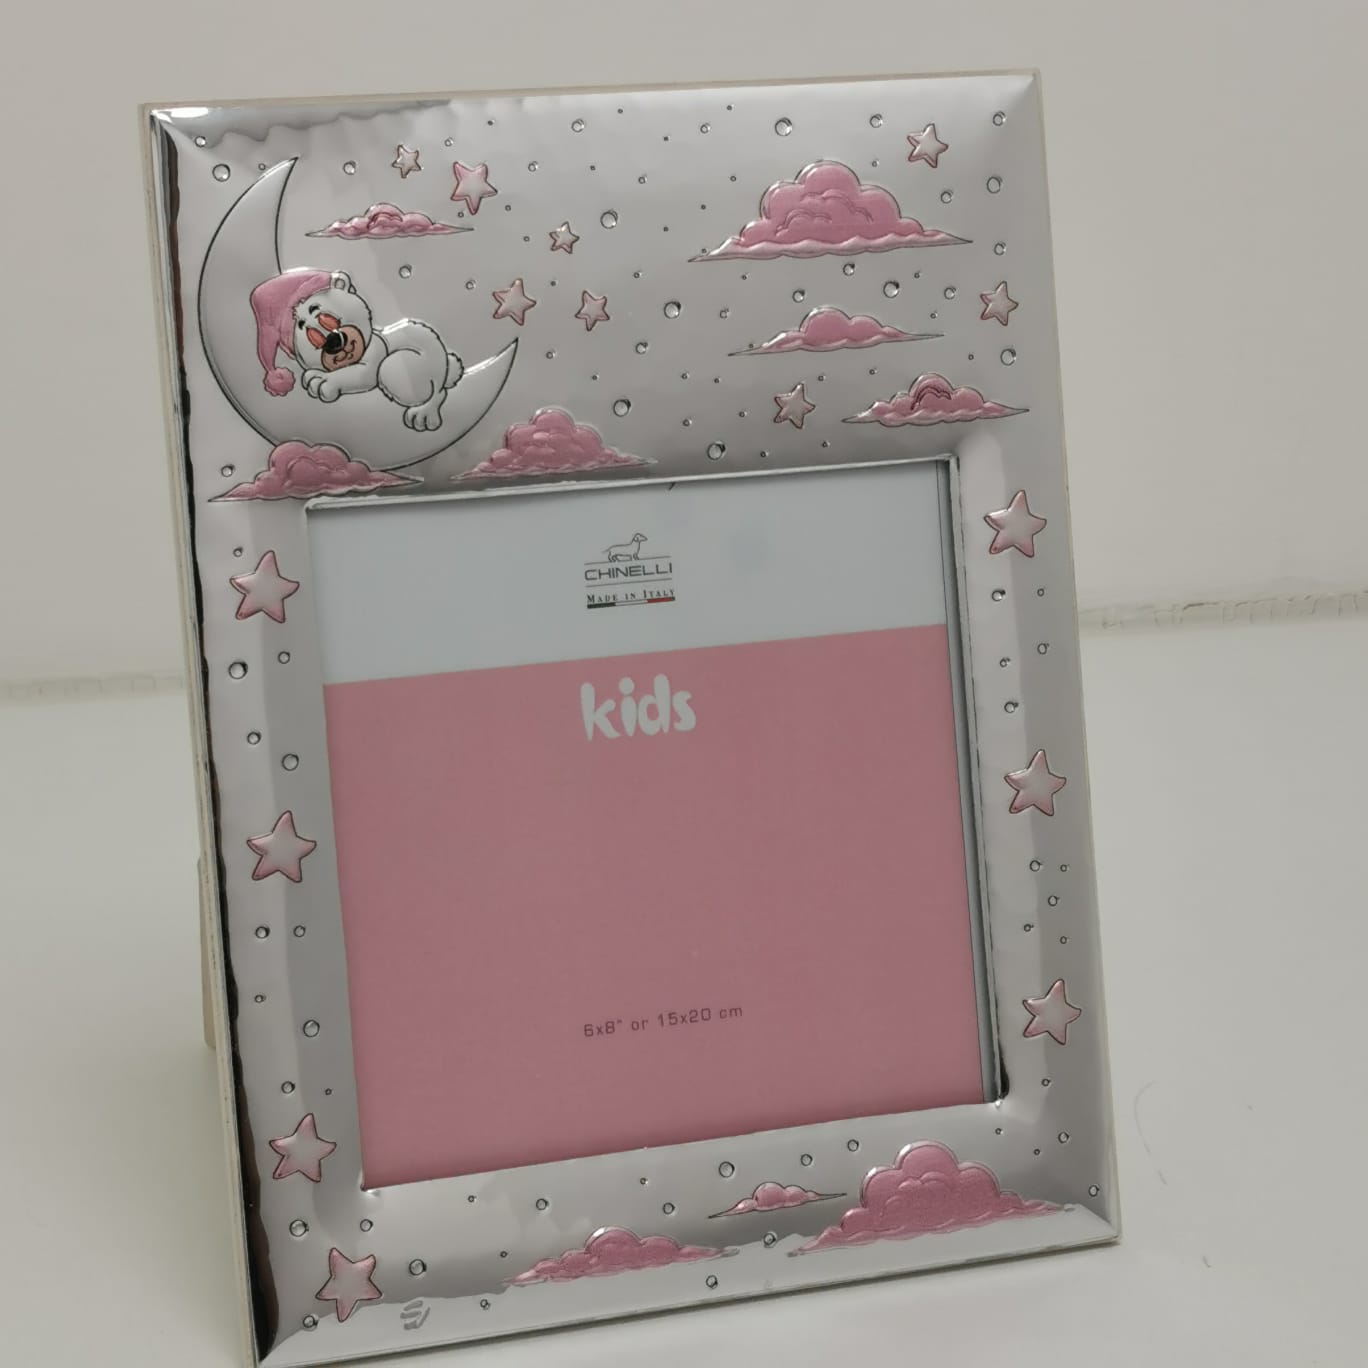 Chinelli Medium Pink Sleeping on the Moon Photo Frame 6x8 Inch Or 15x20cm